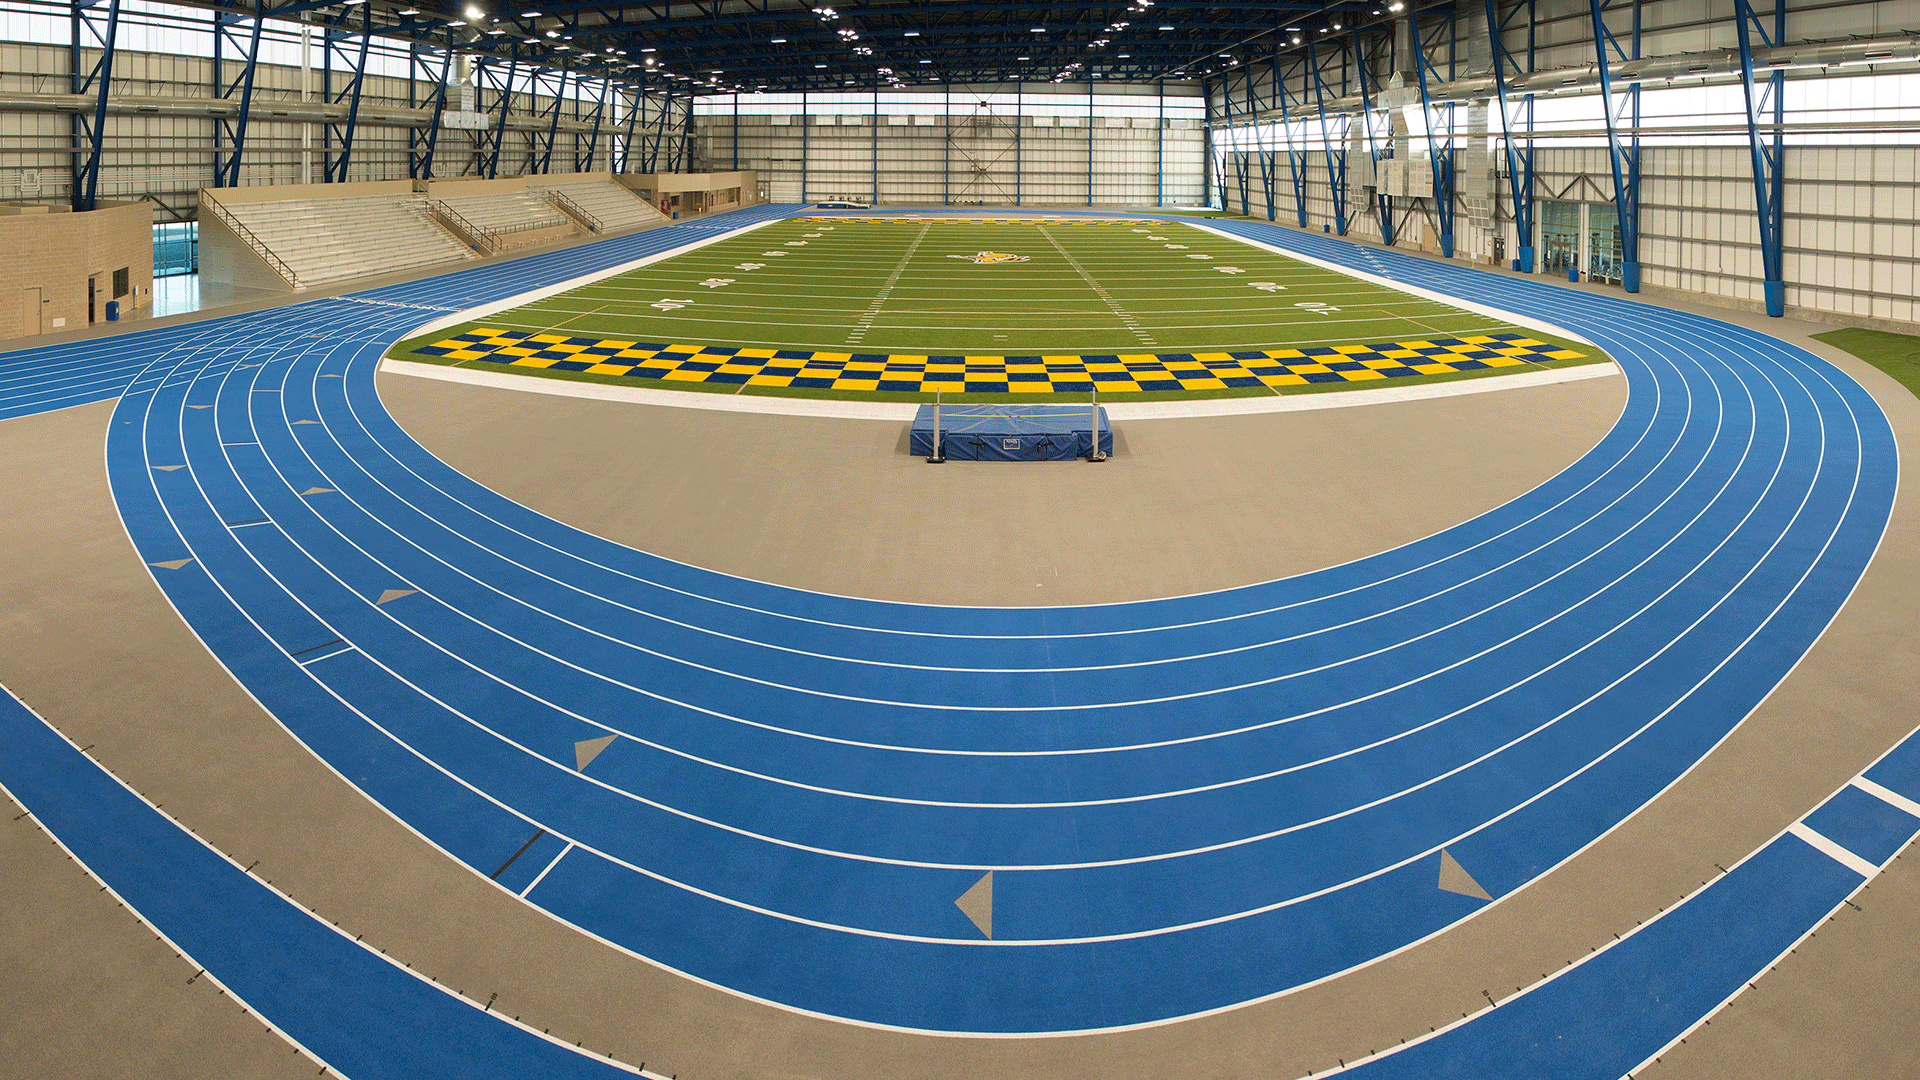 Welcome to the largest indoor track facility in the NCAA - Renner